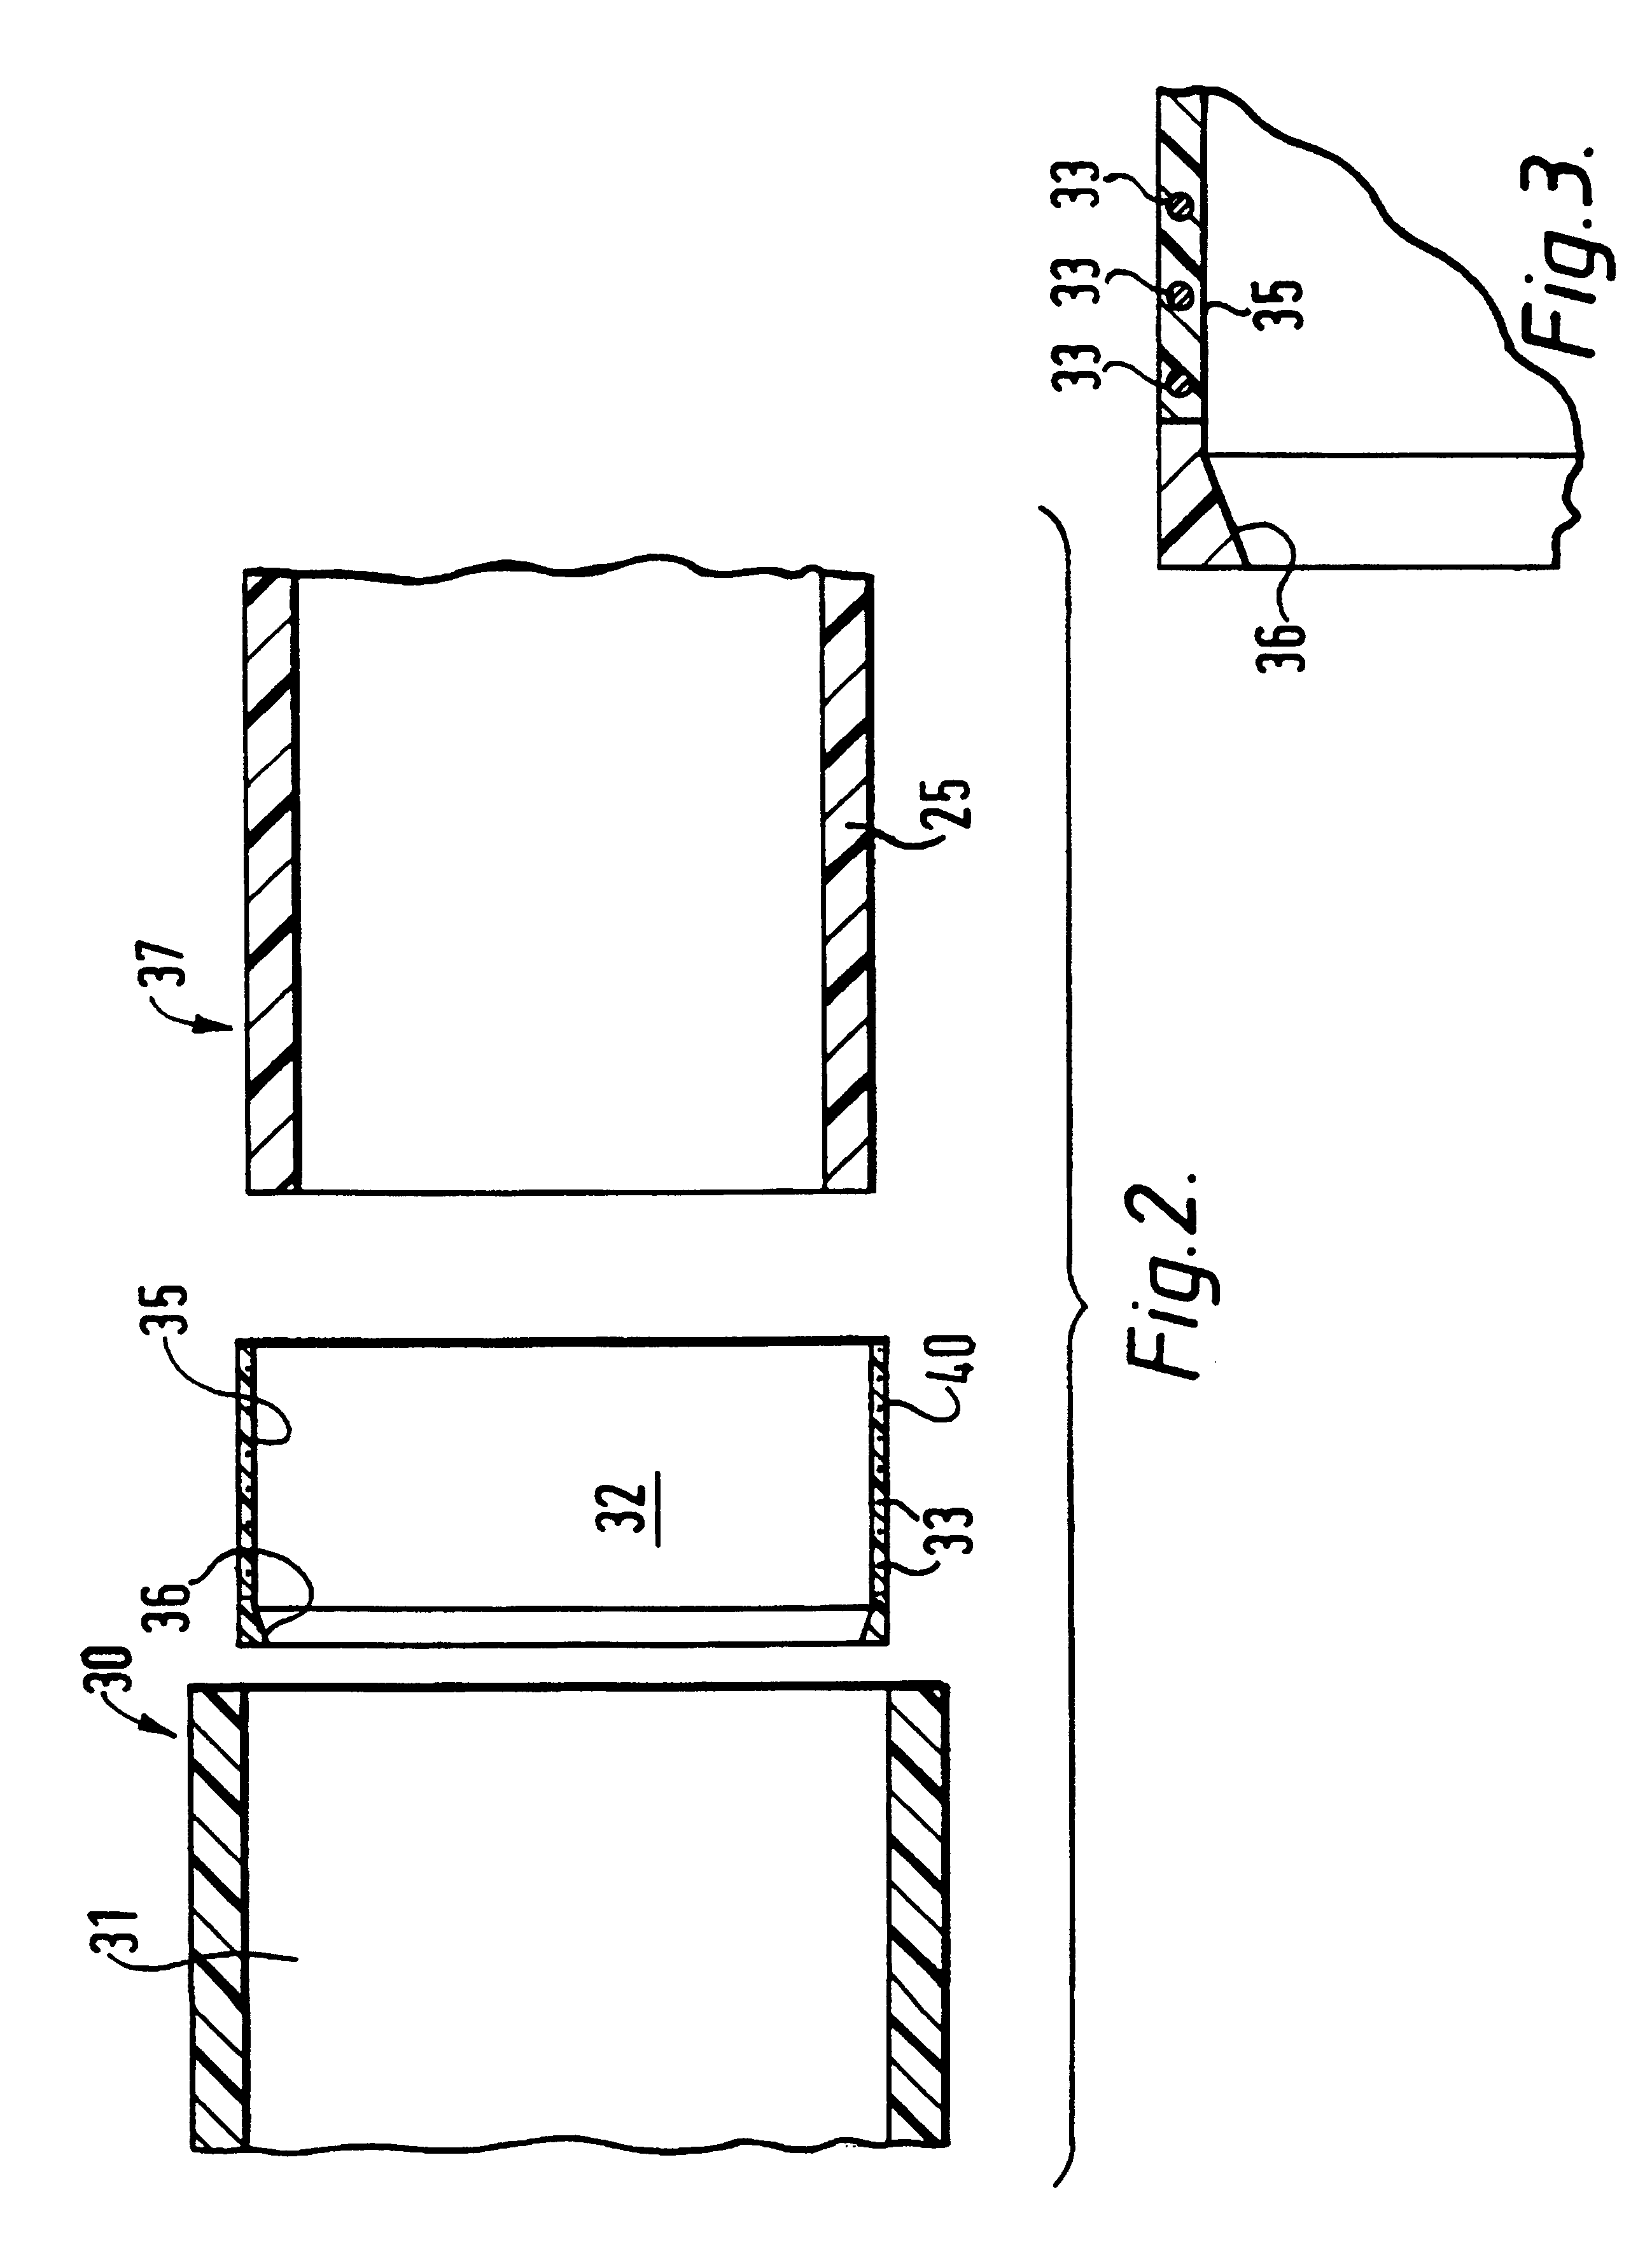 Apparatus and method for fusion joining a pipe and fittings